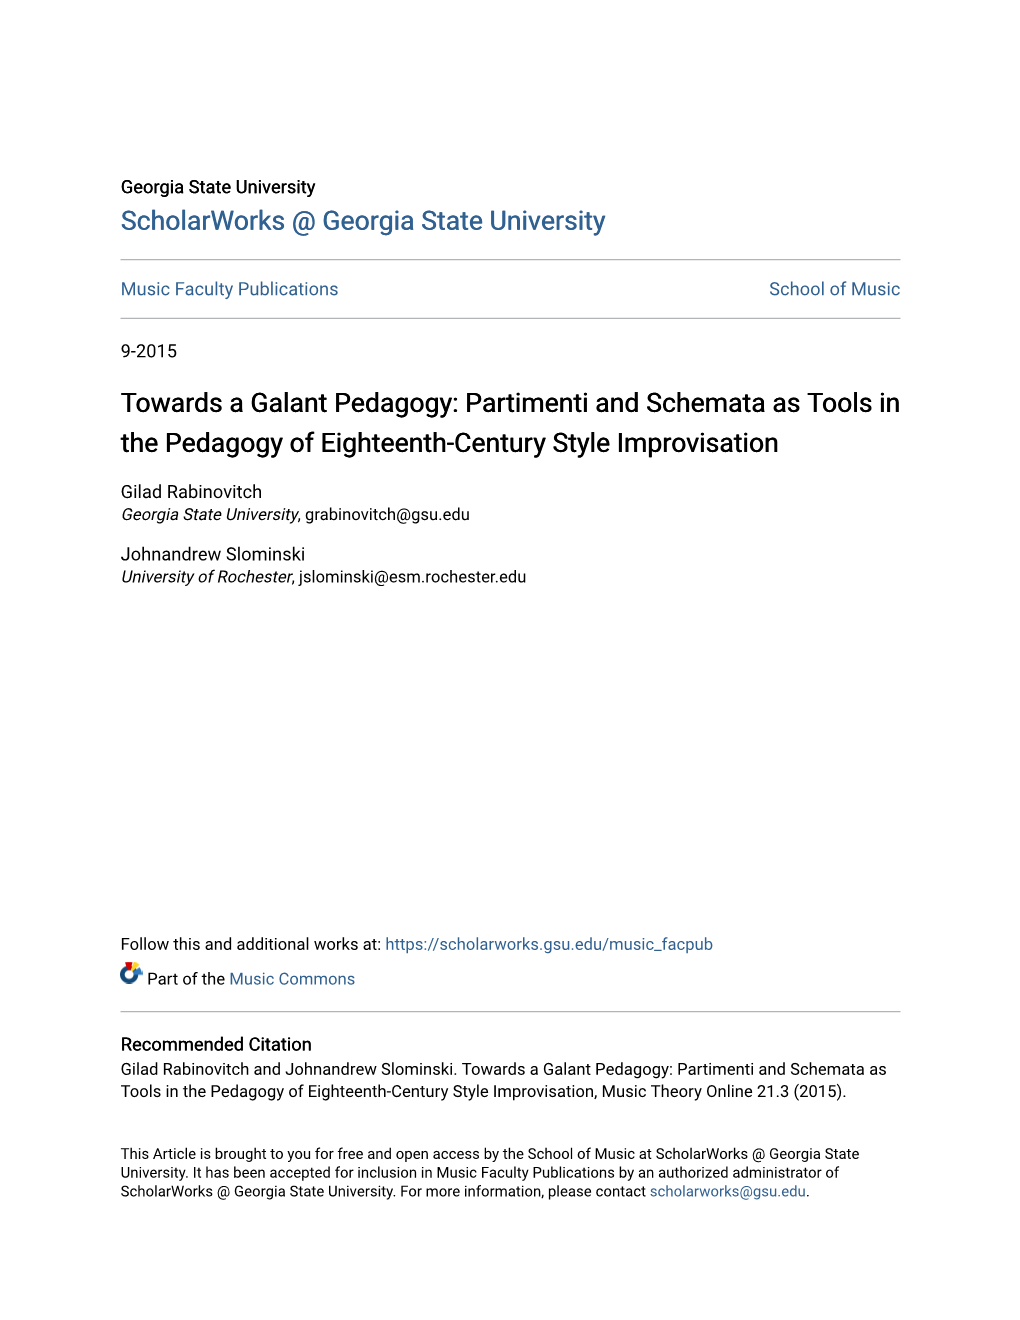 Towards a Galant Pedagogy: Partimenti and Schemata As Tools in the Pedagogy of Eighteenth-Century Style Improvisation